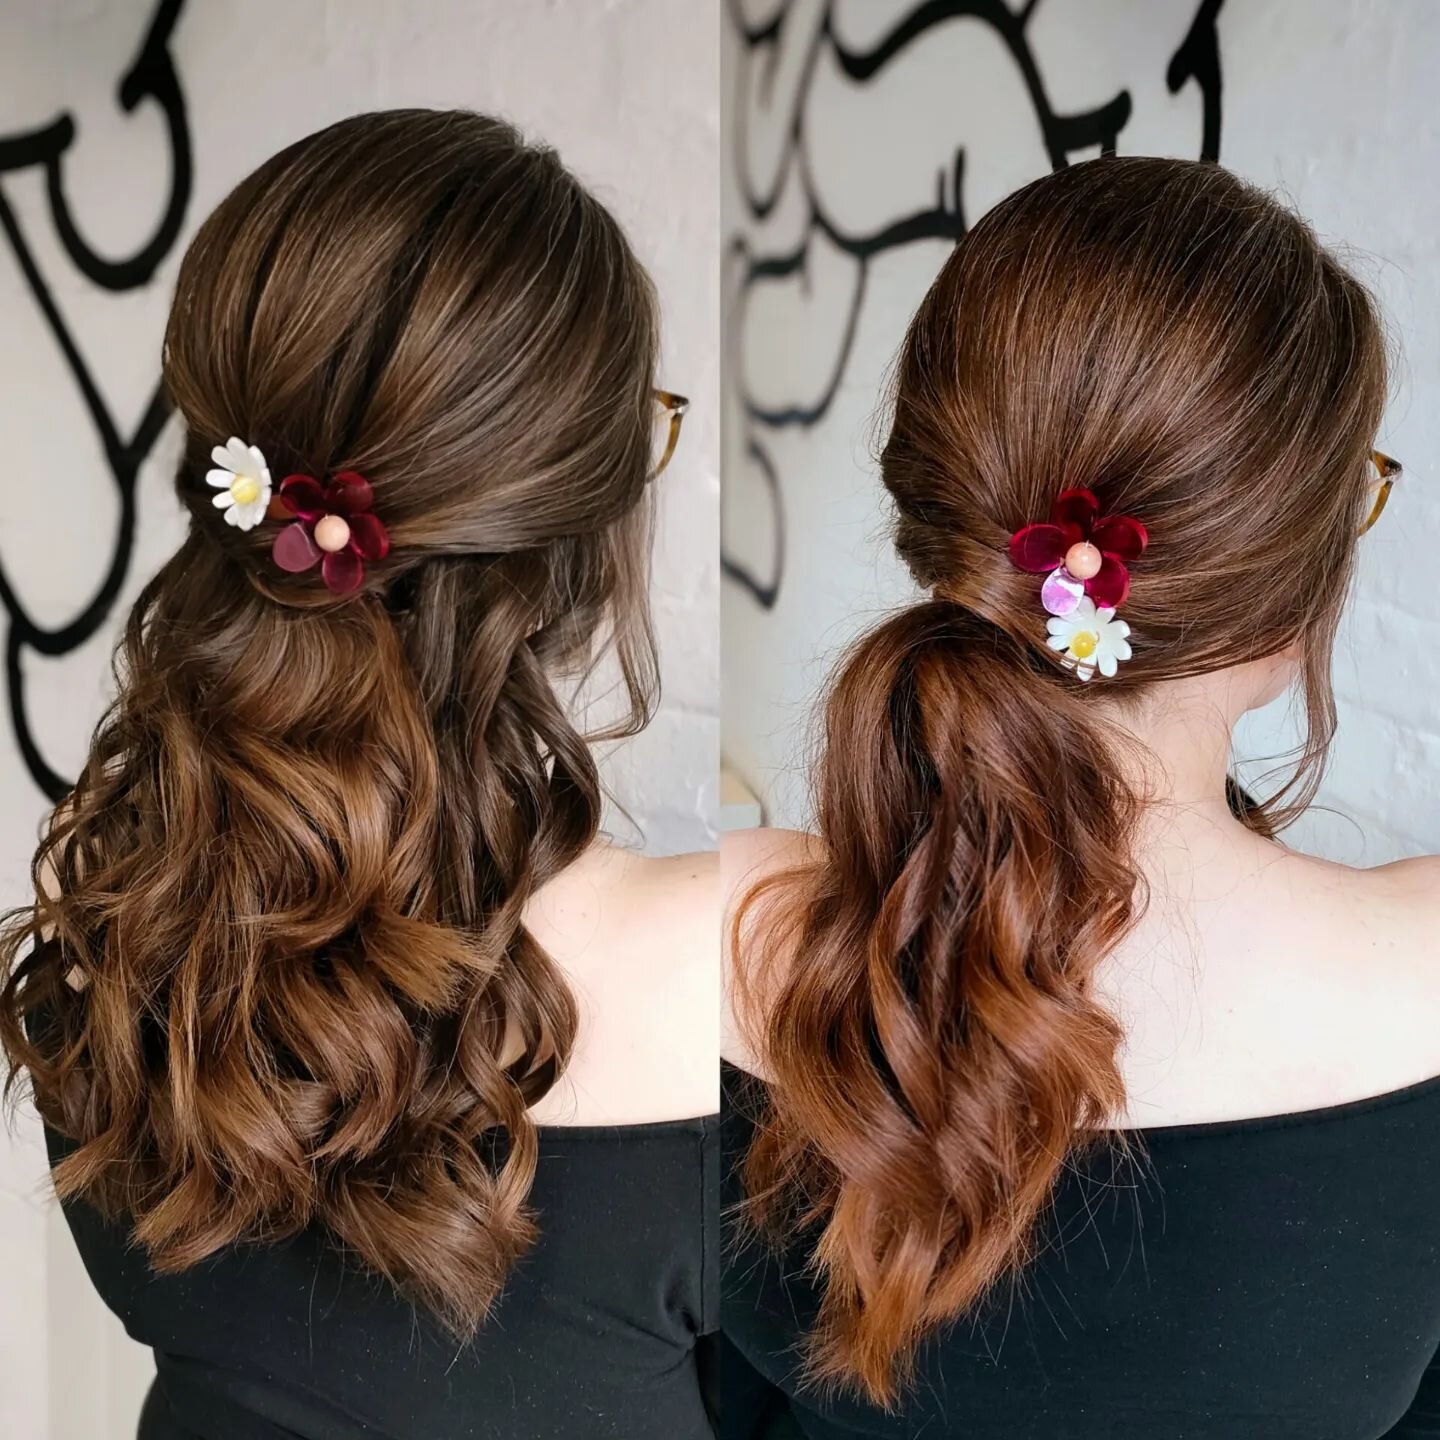 Tips on choosing your wedding hair ⬇️

✨ NOTE WHAT SUITS YOU
You need to feel confident on your wedding day

✨ PRIORITISE
What is most important to you? Sometimes you can't have it all, especially with hair that doesn't hold a curl/wave. 
Some priori